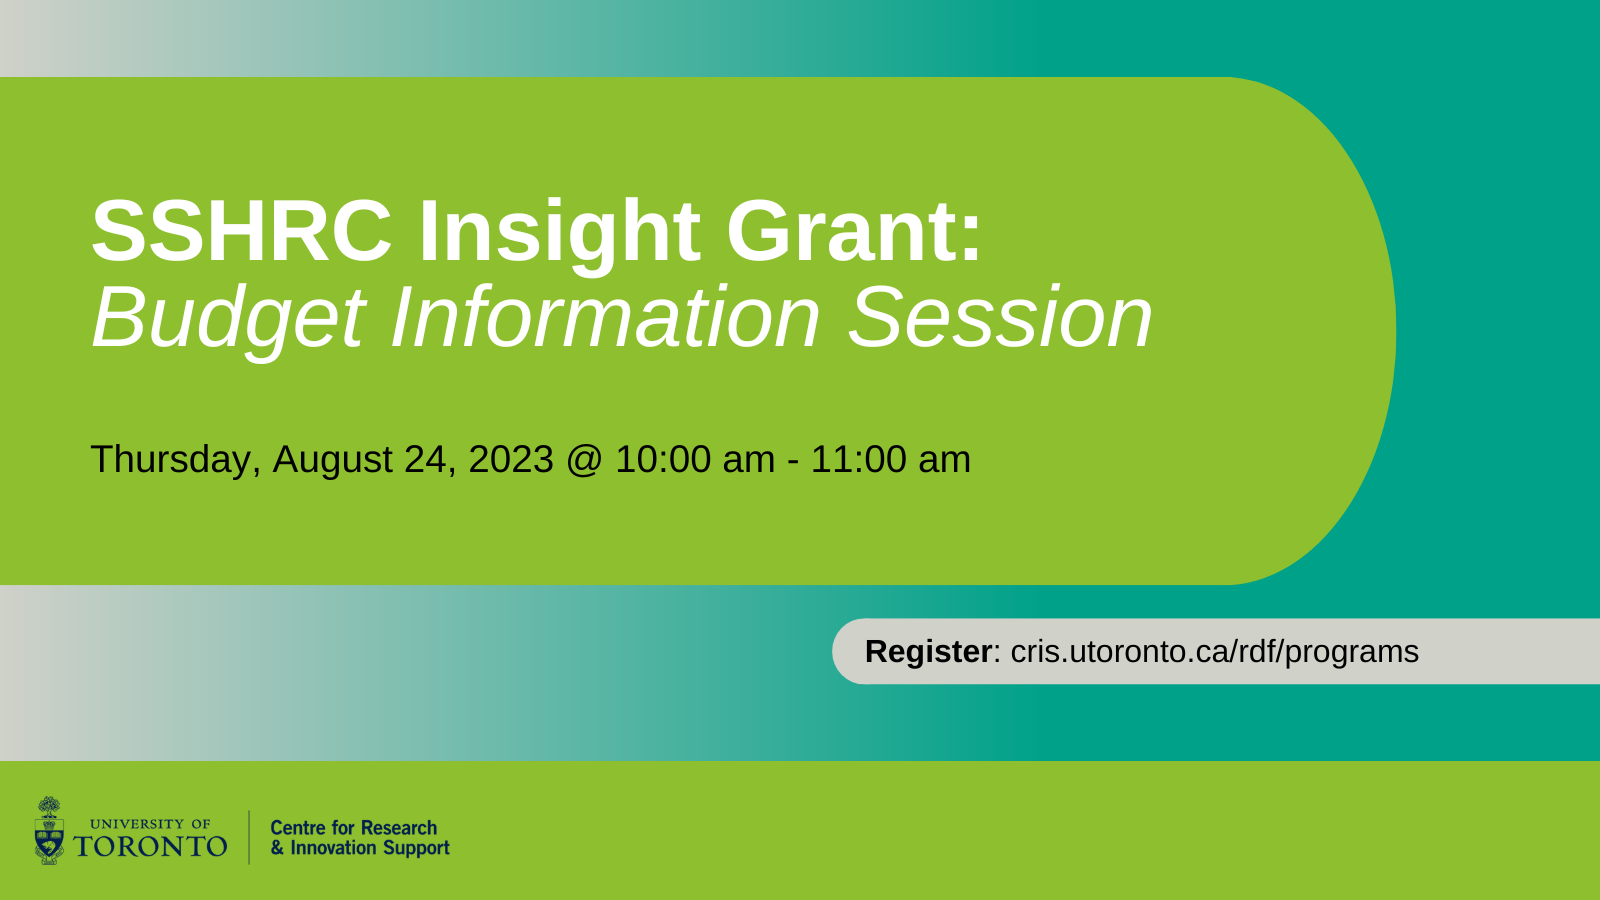 Session poster including event title, date and time, and registration link on a green and teal background